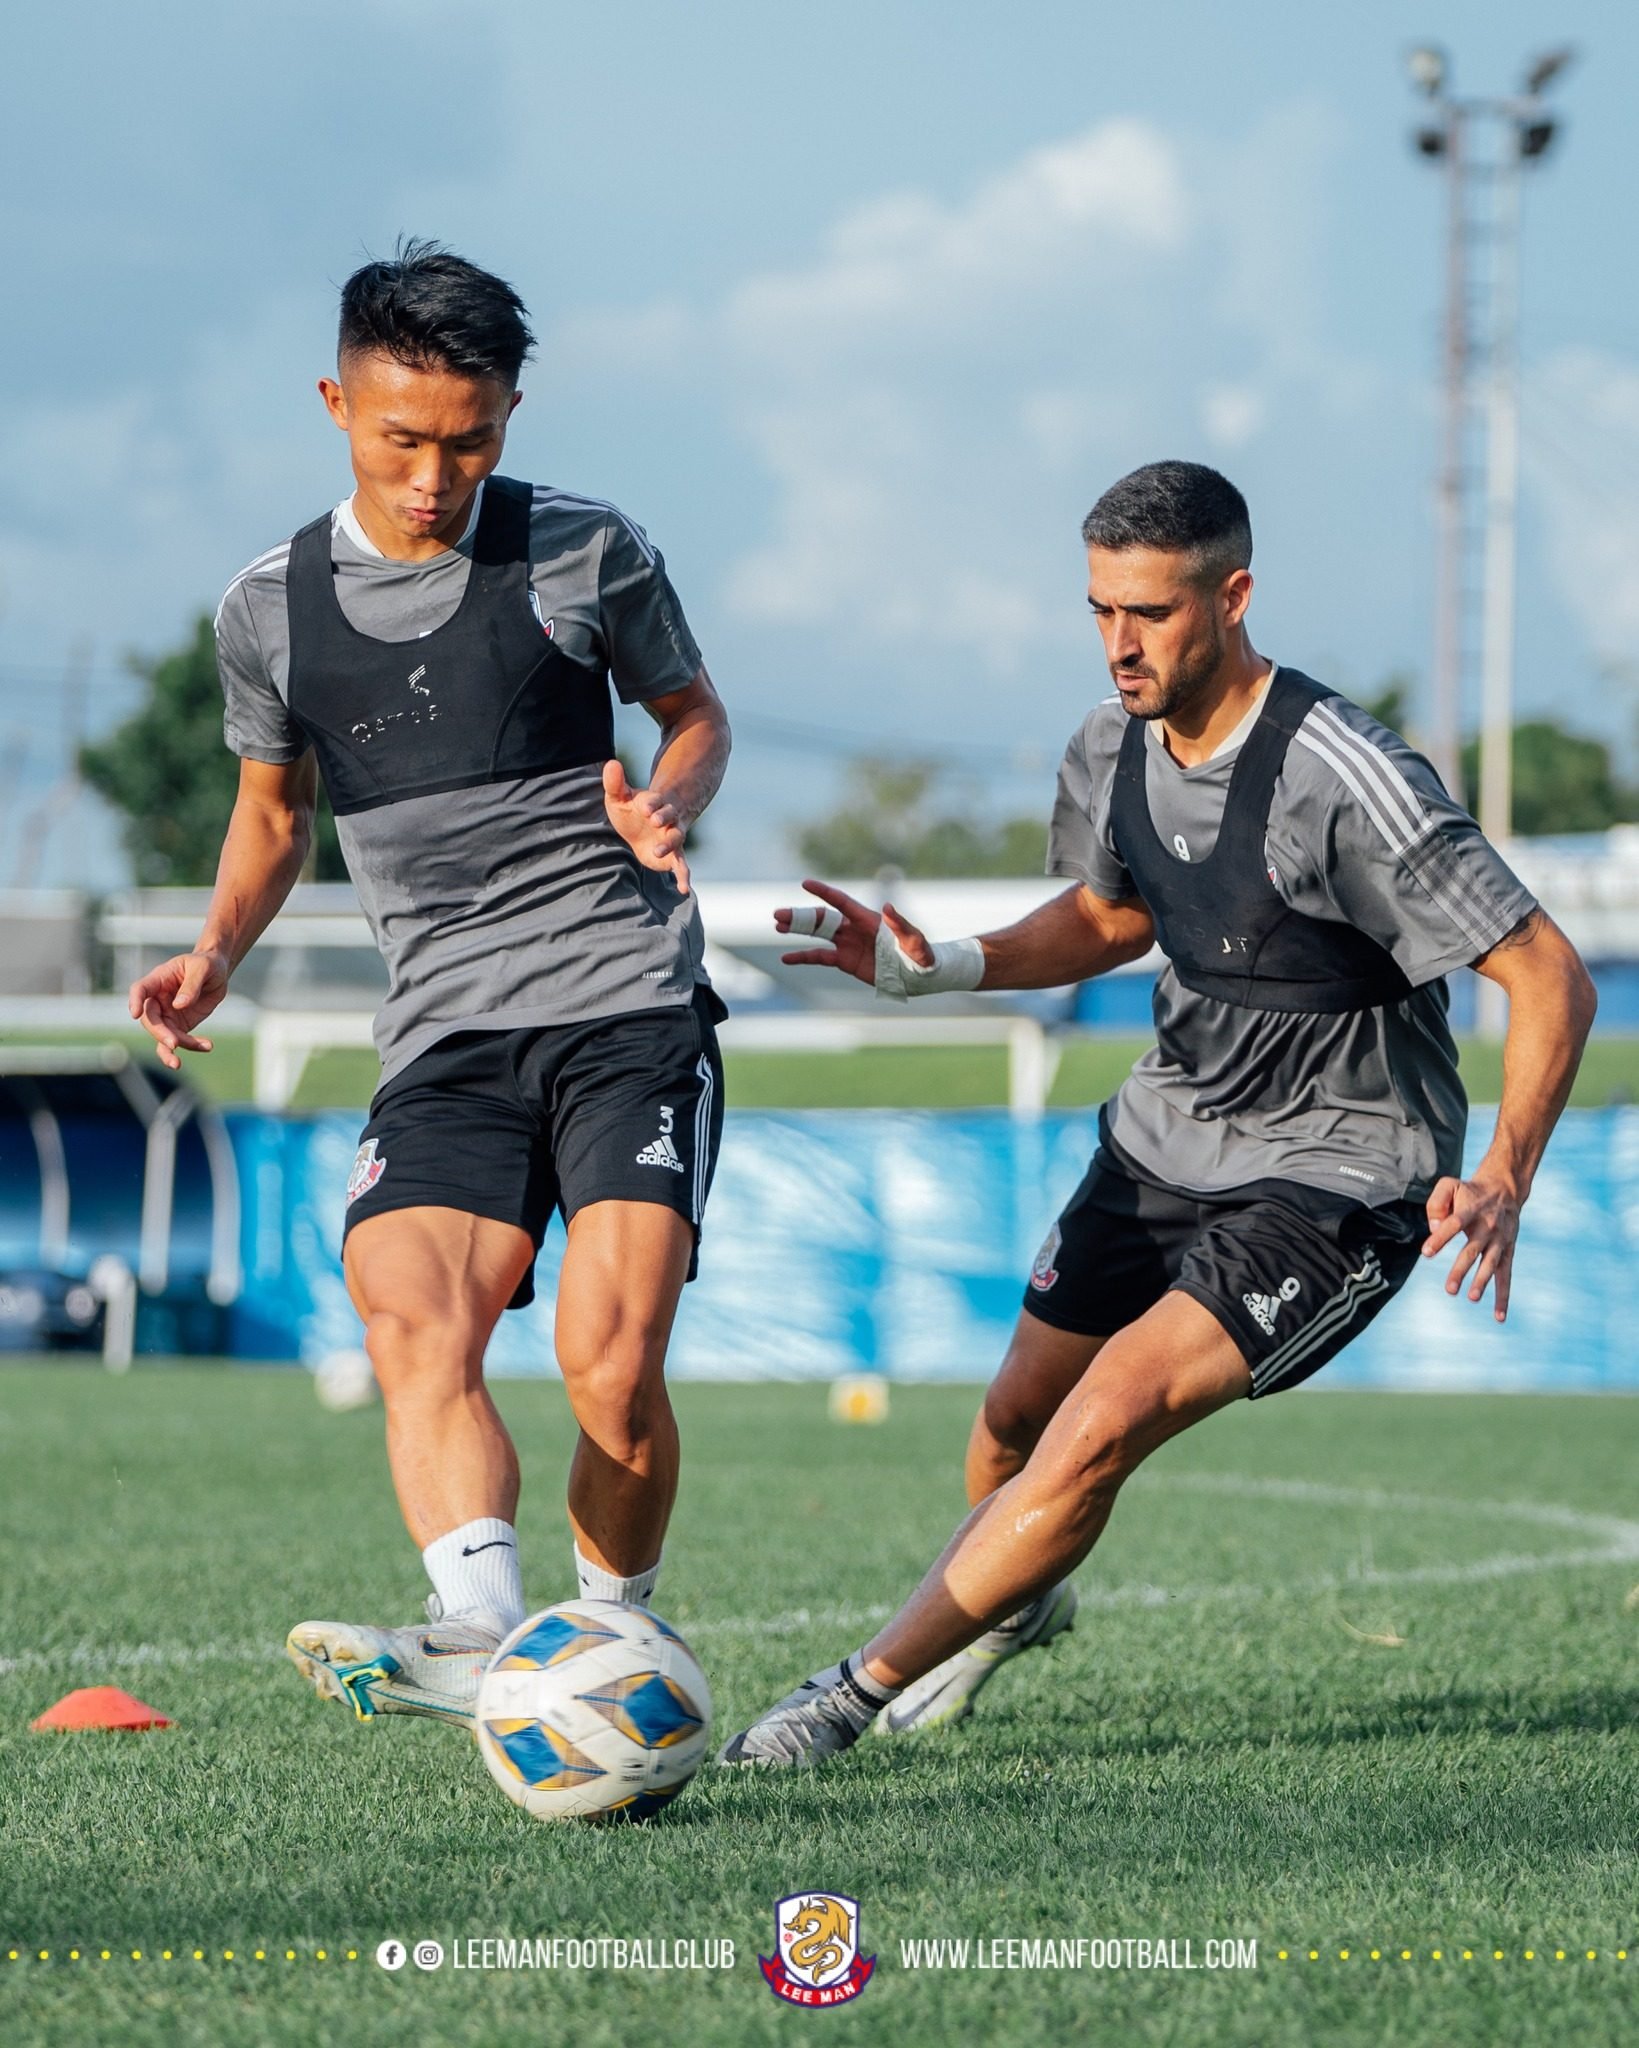 Tsui Wang-kit returns to Lee Man in Thailand after recovering from Covid-19 during the Asian Cup qualifiers in Kolkata. Tsui in training with teammate Manuel Bleda. Photo: Lee Man 